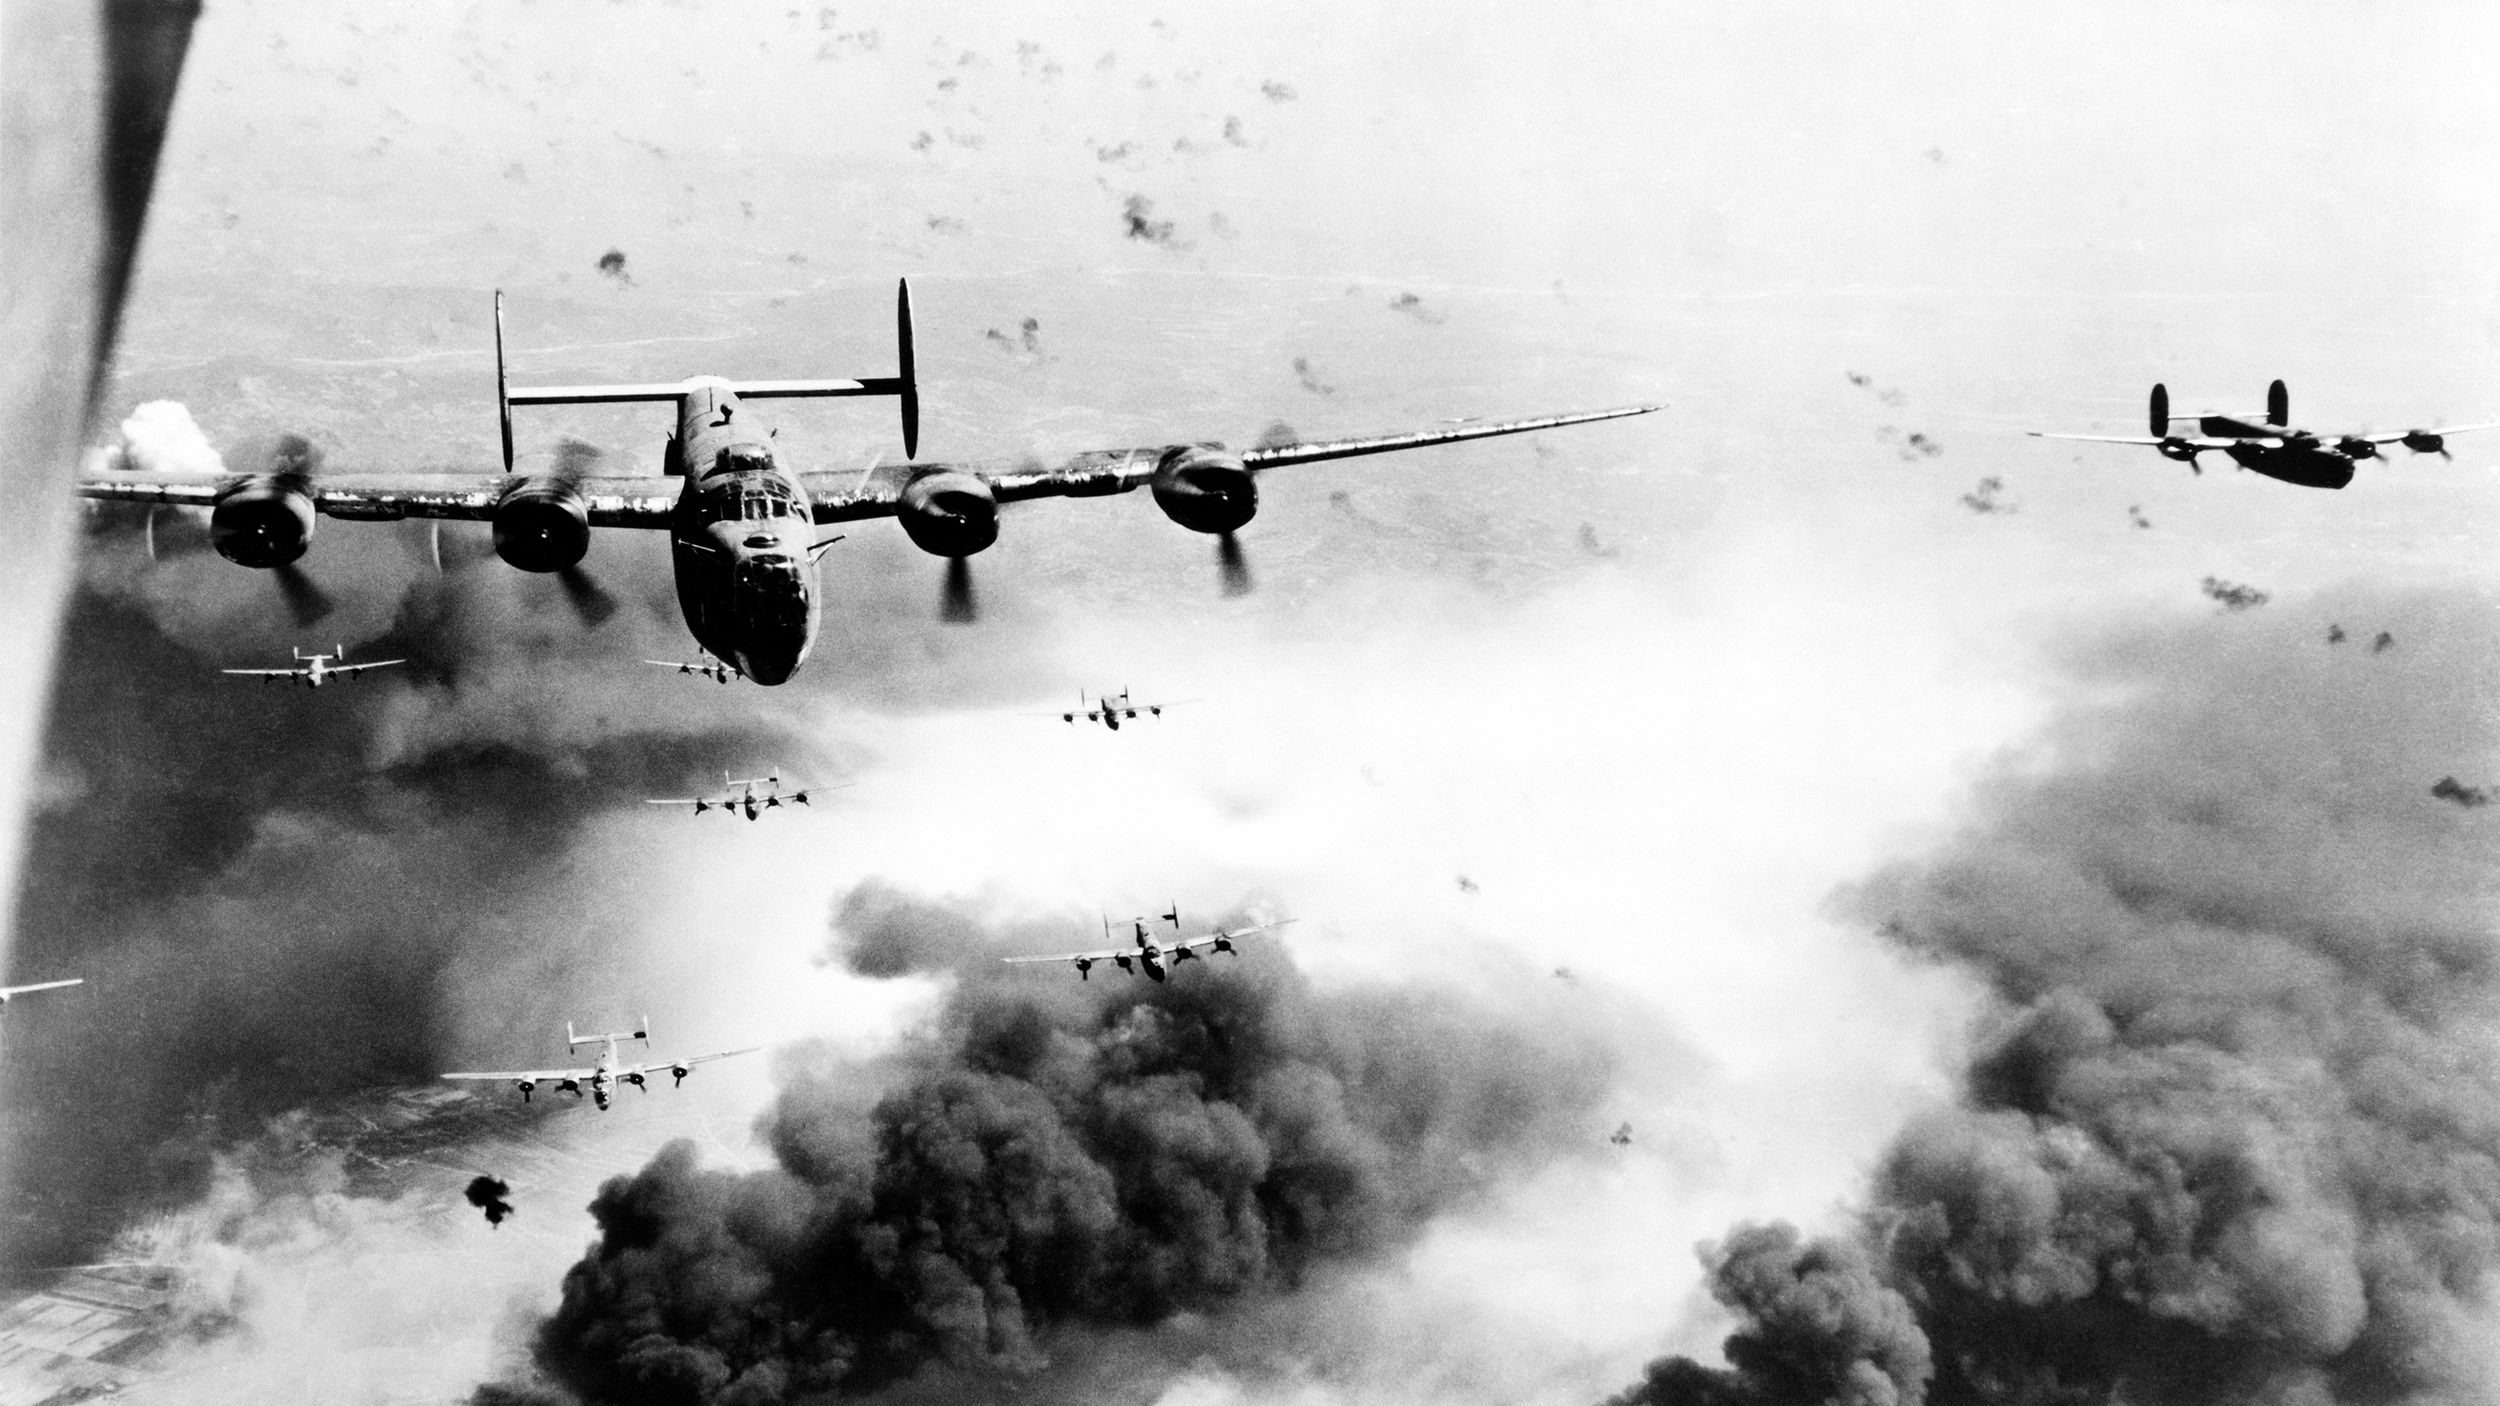 Consolidated B-24 Liberator bombers of the U.S. Fifteenth Air Force fly through thick enemy flak during bombing runs against the oil refinery complex at Ploesti, Romania. These bombers executed one of the most hazardous missions of World War II, and accurate weather information decrypted from German sources facilitated such air operations.